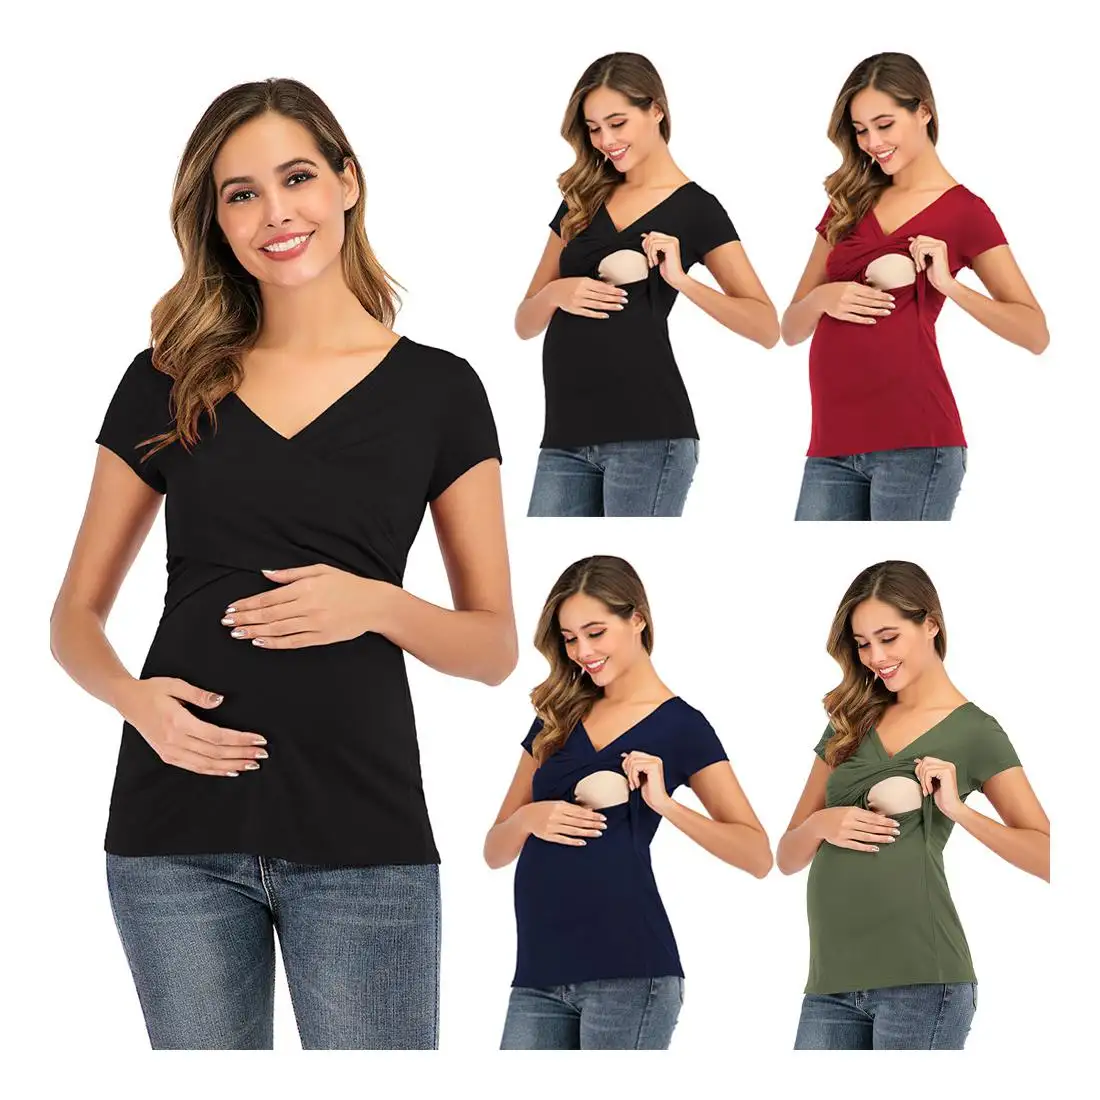 Pregnant Women's Sandal Party Wear Women's Gym Wear Set New Style Short Sleeve Deep V-Neck Solid Color Cross Breast And